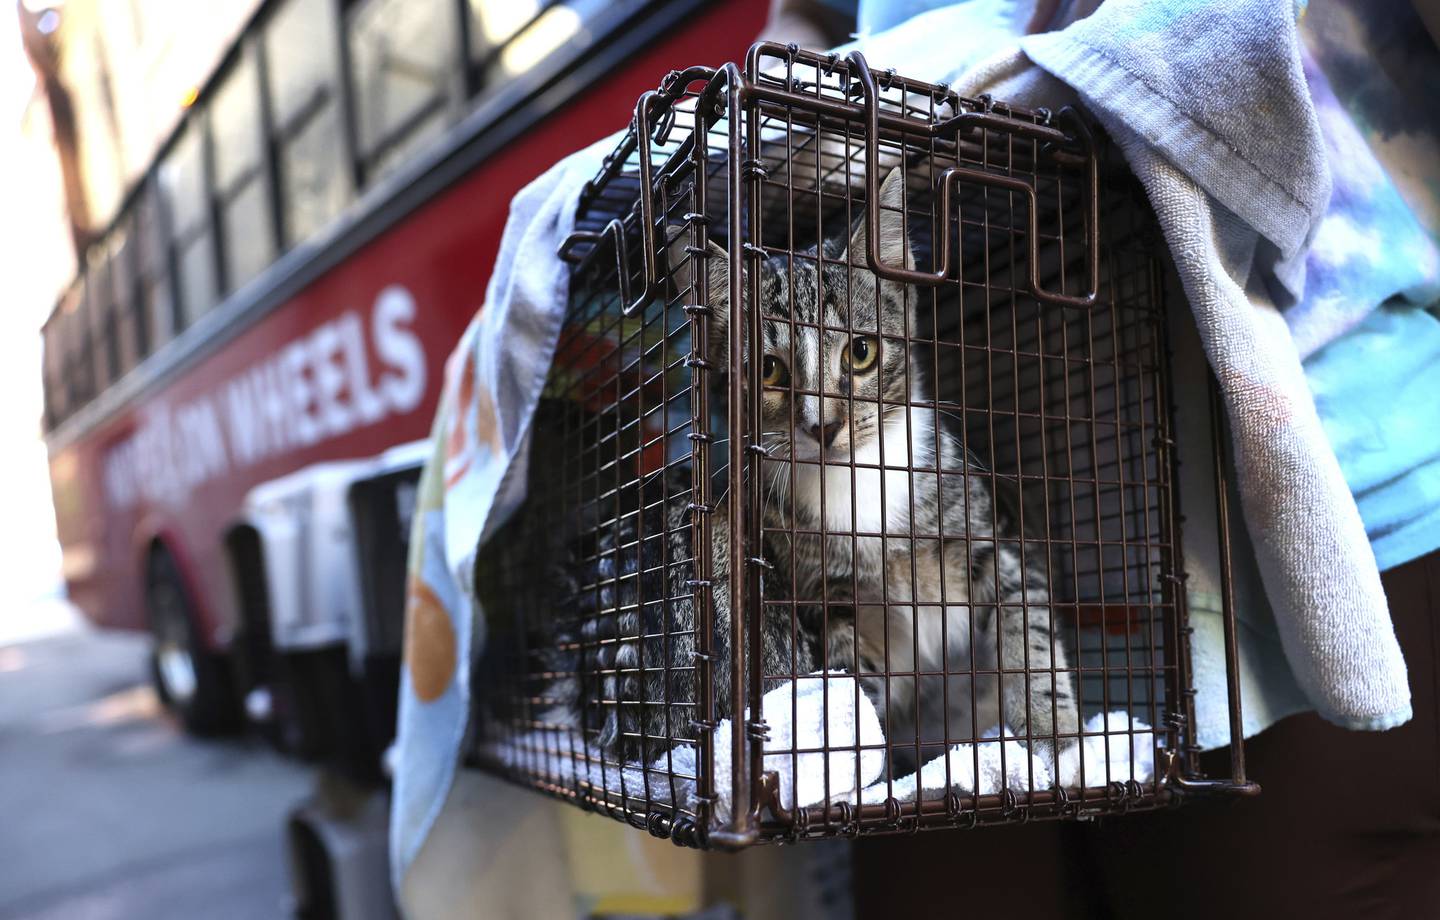 Cats are carried in cages as workers and volunteers at Anti-Cruelty Society unload adoptable dogs and cats from a bus traveling in from Furry Friends shelter in Jupiter, Florida.